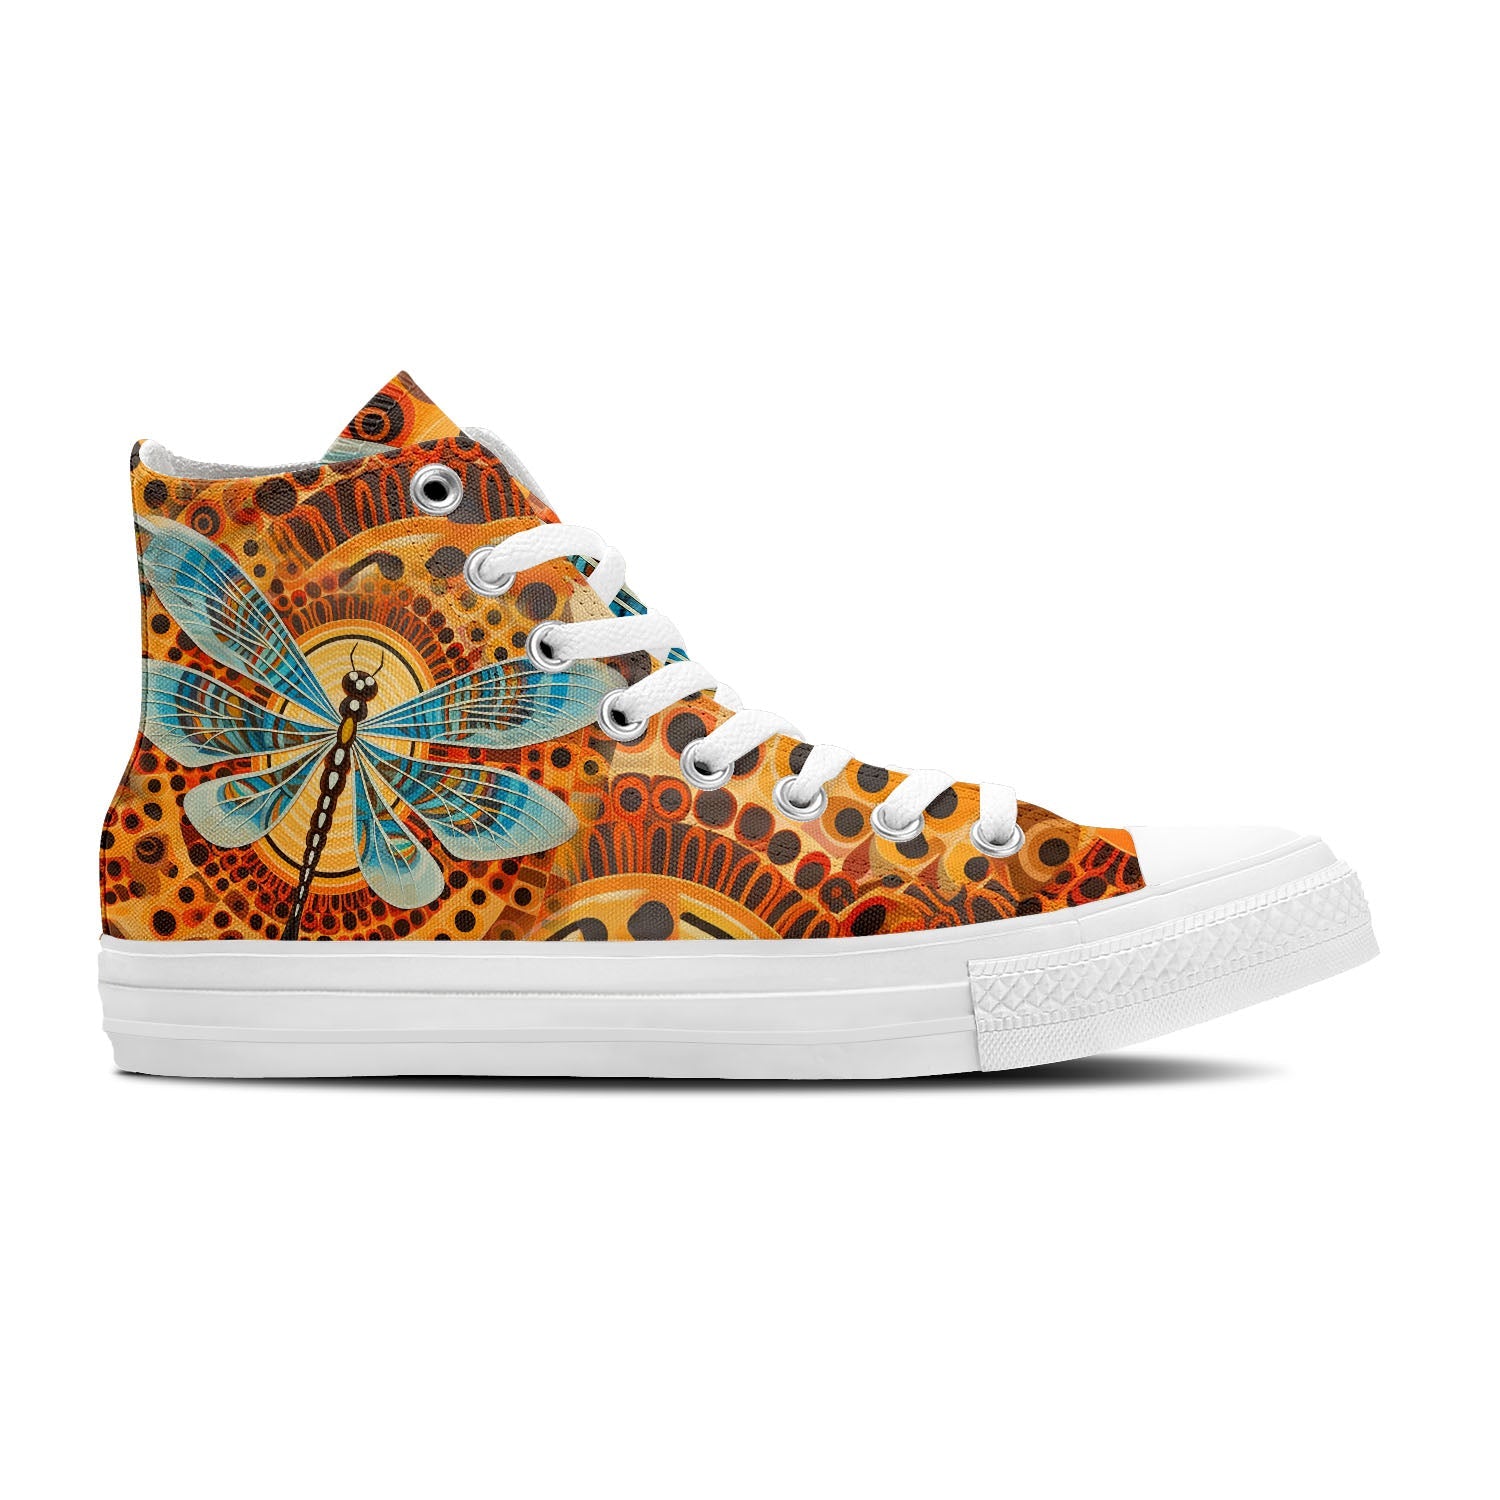 Ethereal Wings: Elevate Your Style with Men and Women's Mid-Top Canvas Shoes - Captivating Op Art Dragonfly Designs Taking Flight with Every Step